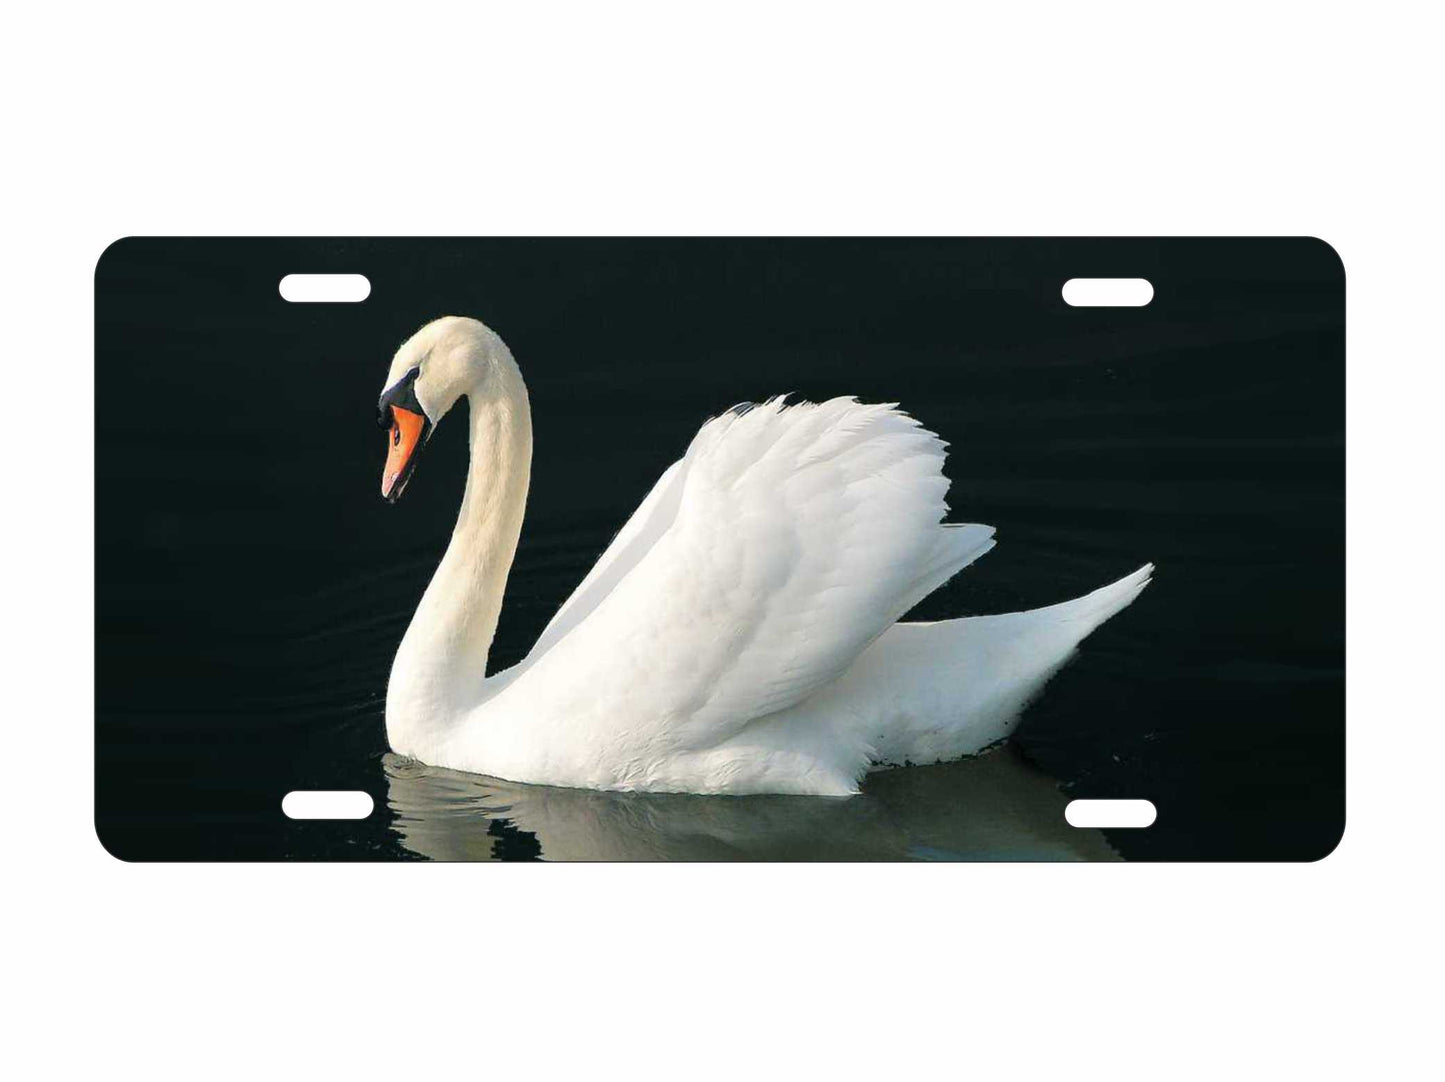 swan novelty front license plate Decorative vanity aluminum car tag